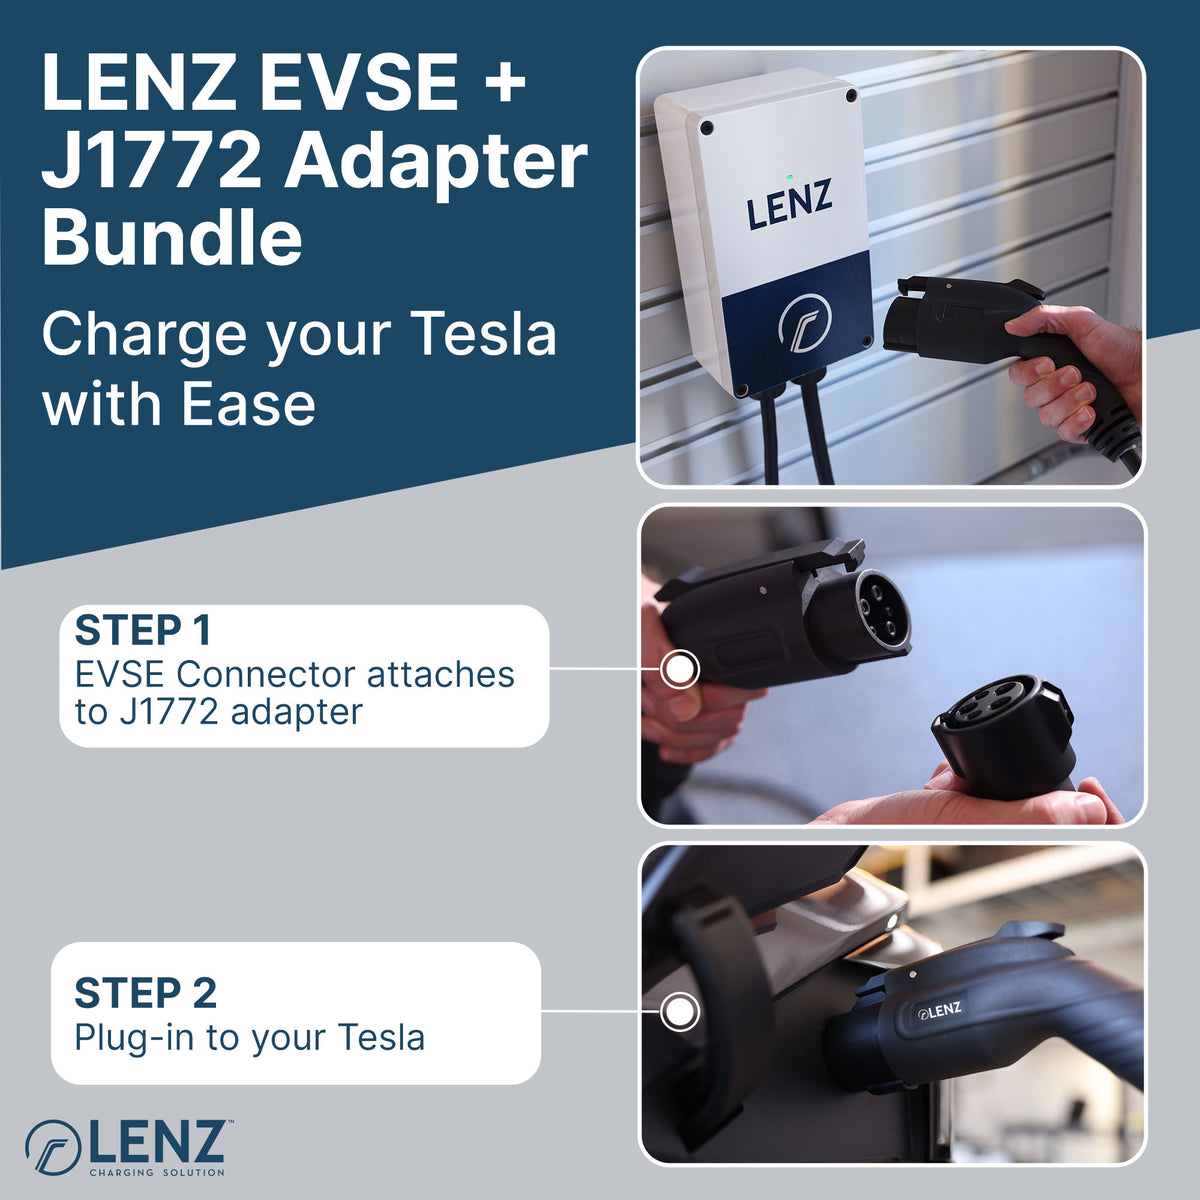 Home Charging Bundle (Charge either Tesla or non-Tesla EV): LENZ Level-2 40A Plugin Charger + J1772 to Tesla Adapter. Perfect combo for homes with Tesla and non-Tesla EVs.